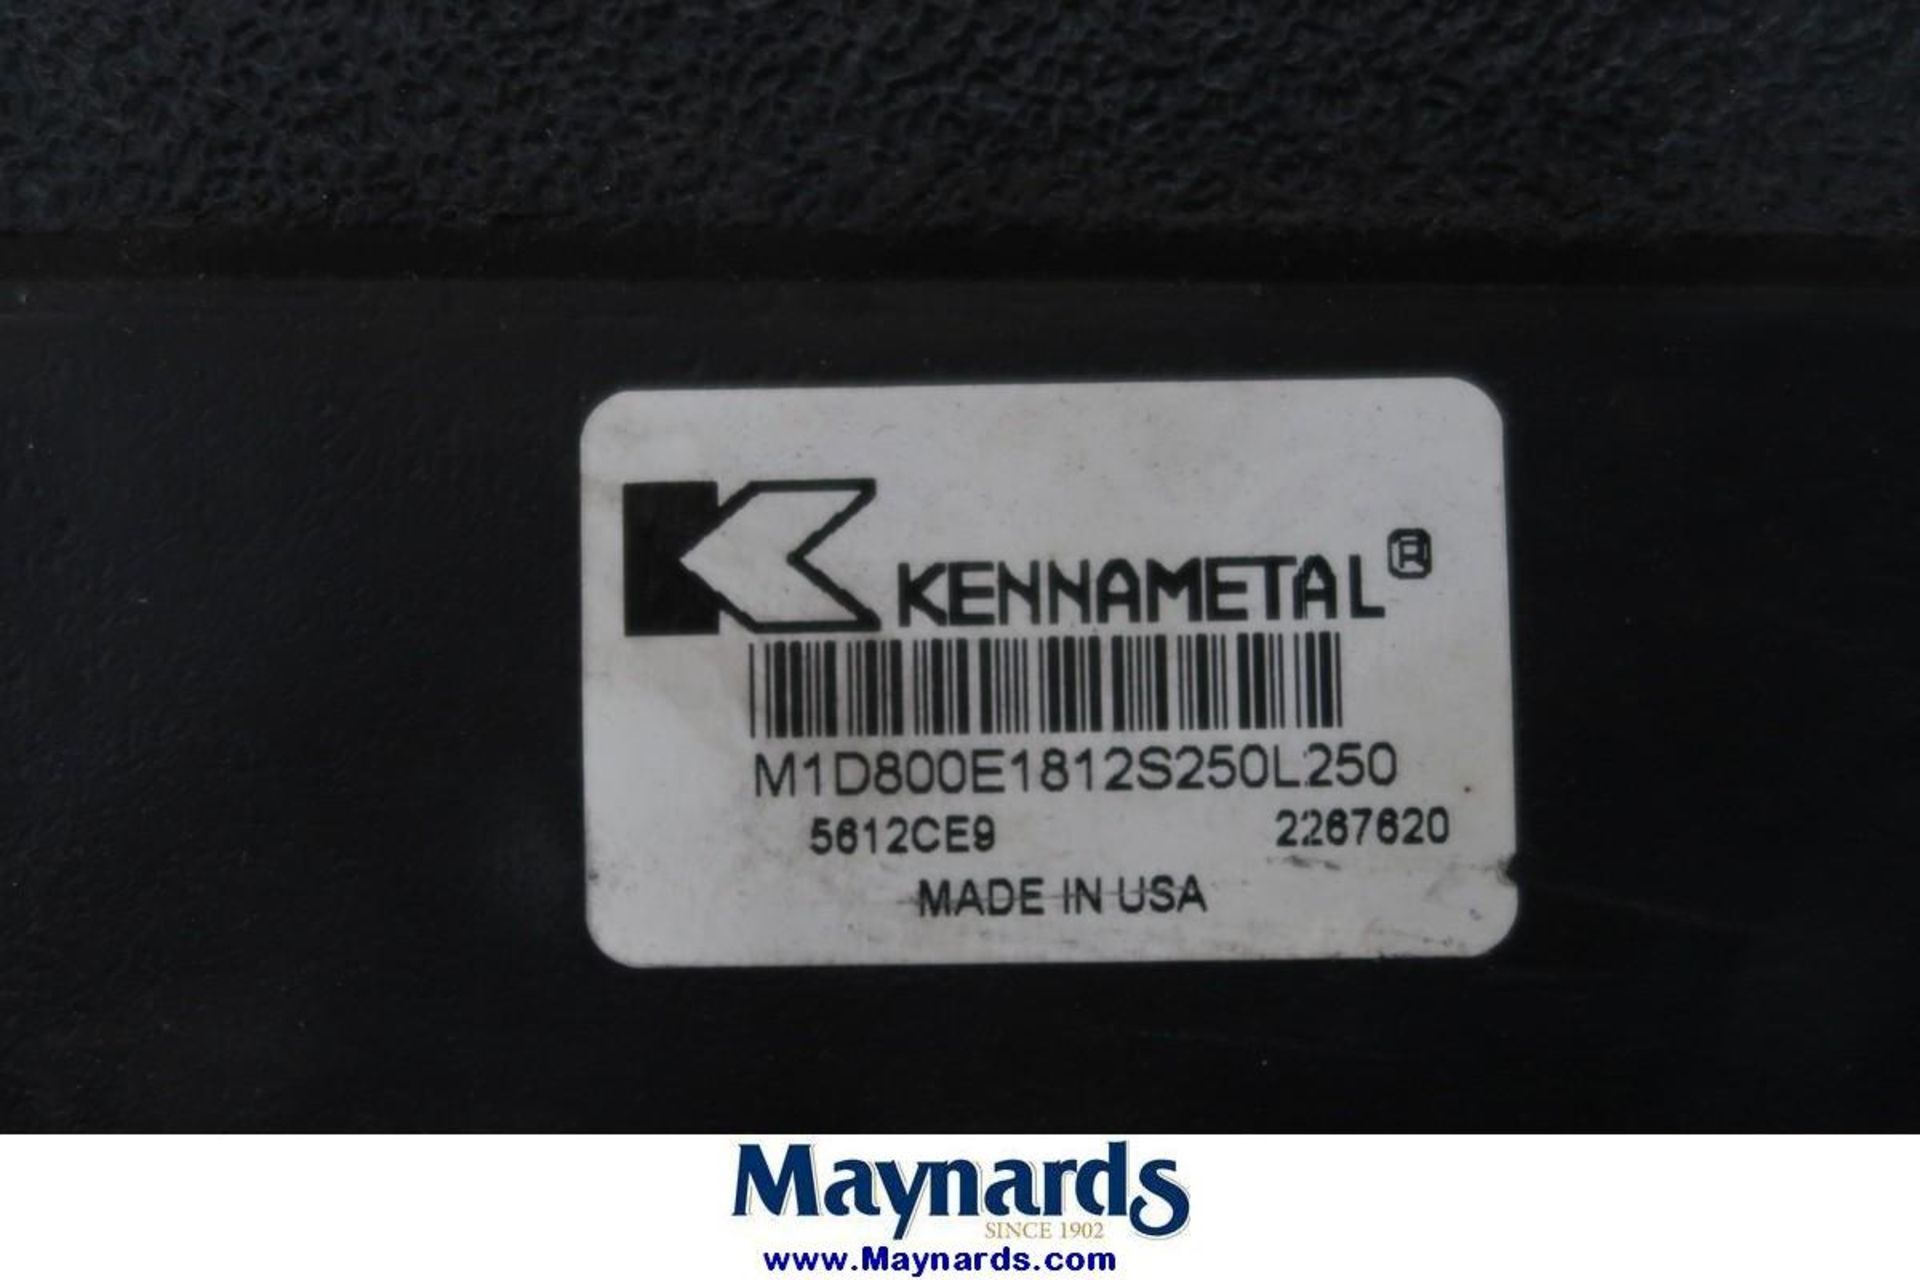 Kennametal M1D800E1812S250L250 8" Shell Mill - Image 4 of 4